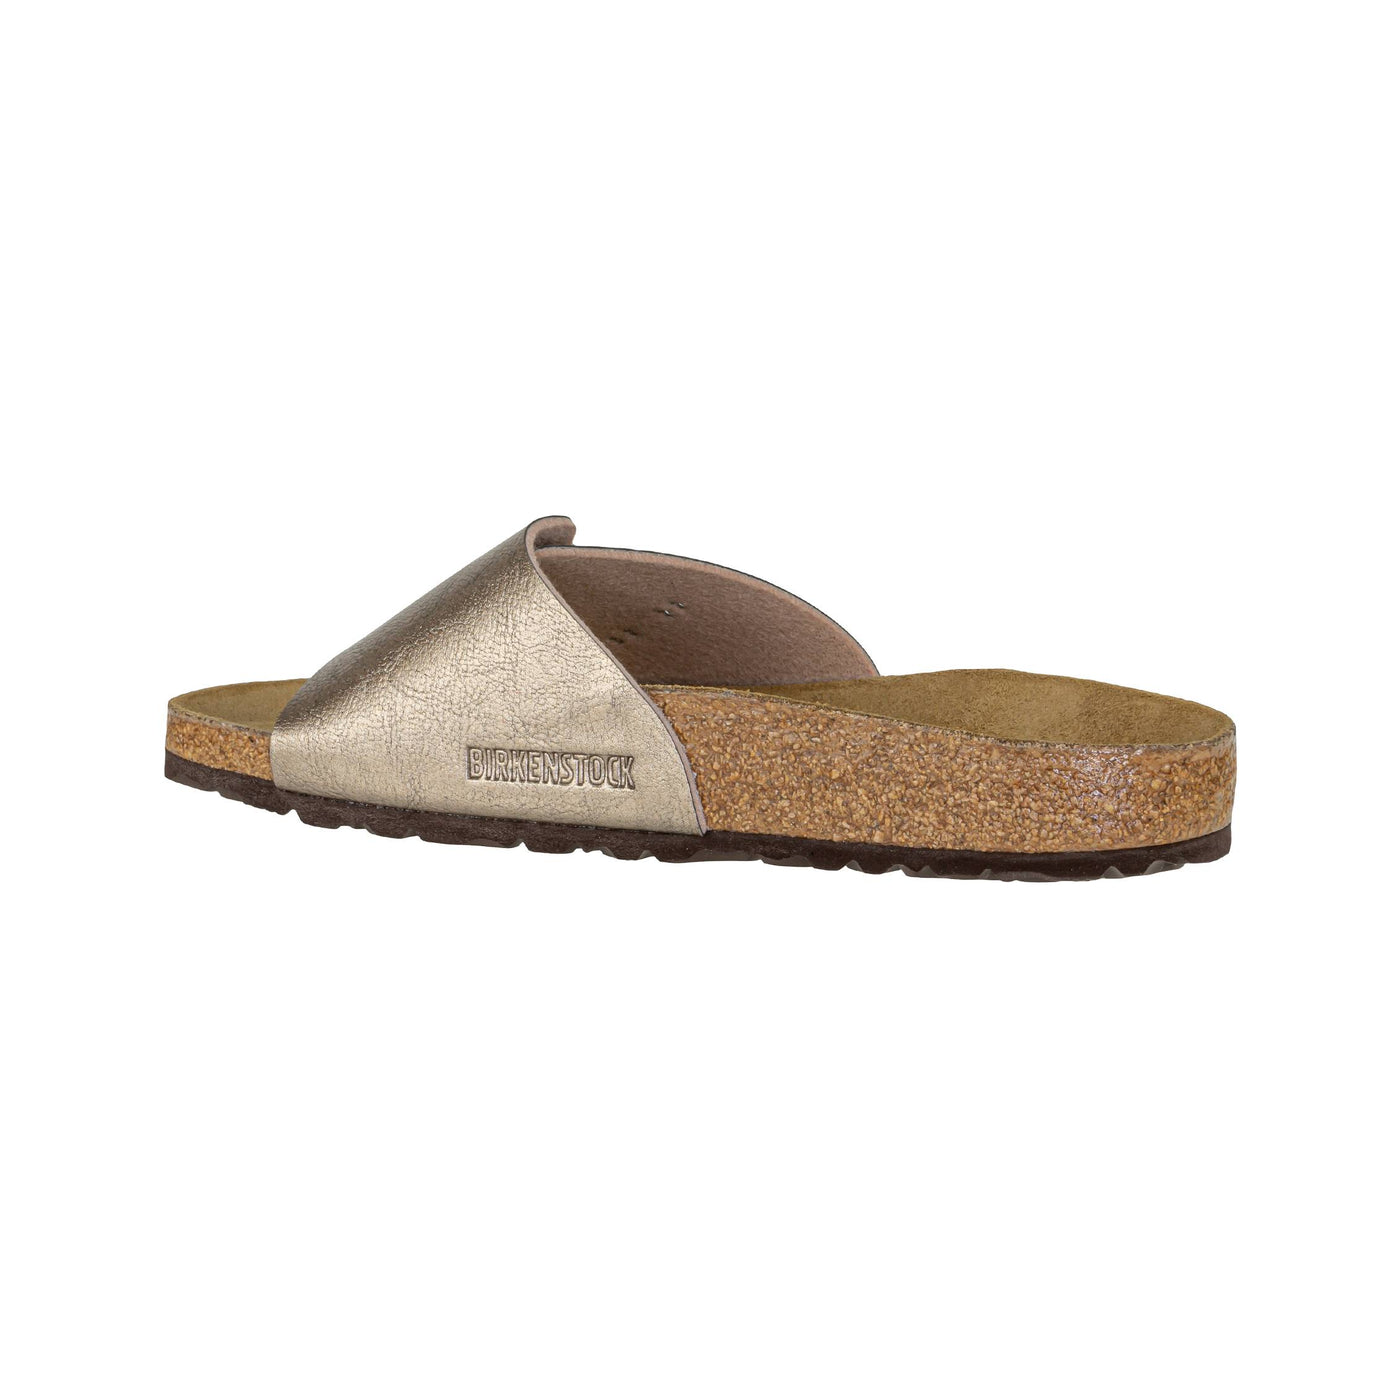 BIRKENSTOCK 1026622 CATALINA BS GRACEFUL TAUPE NARROW FIT